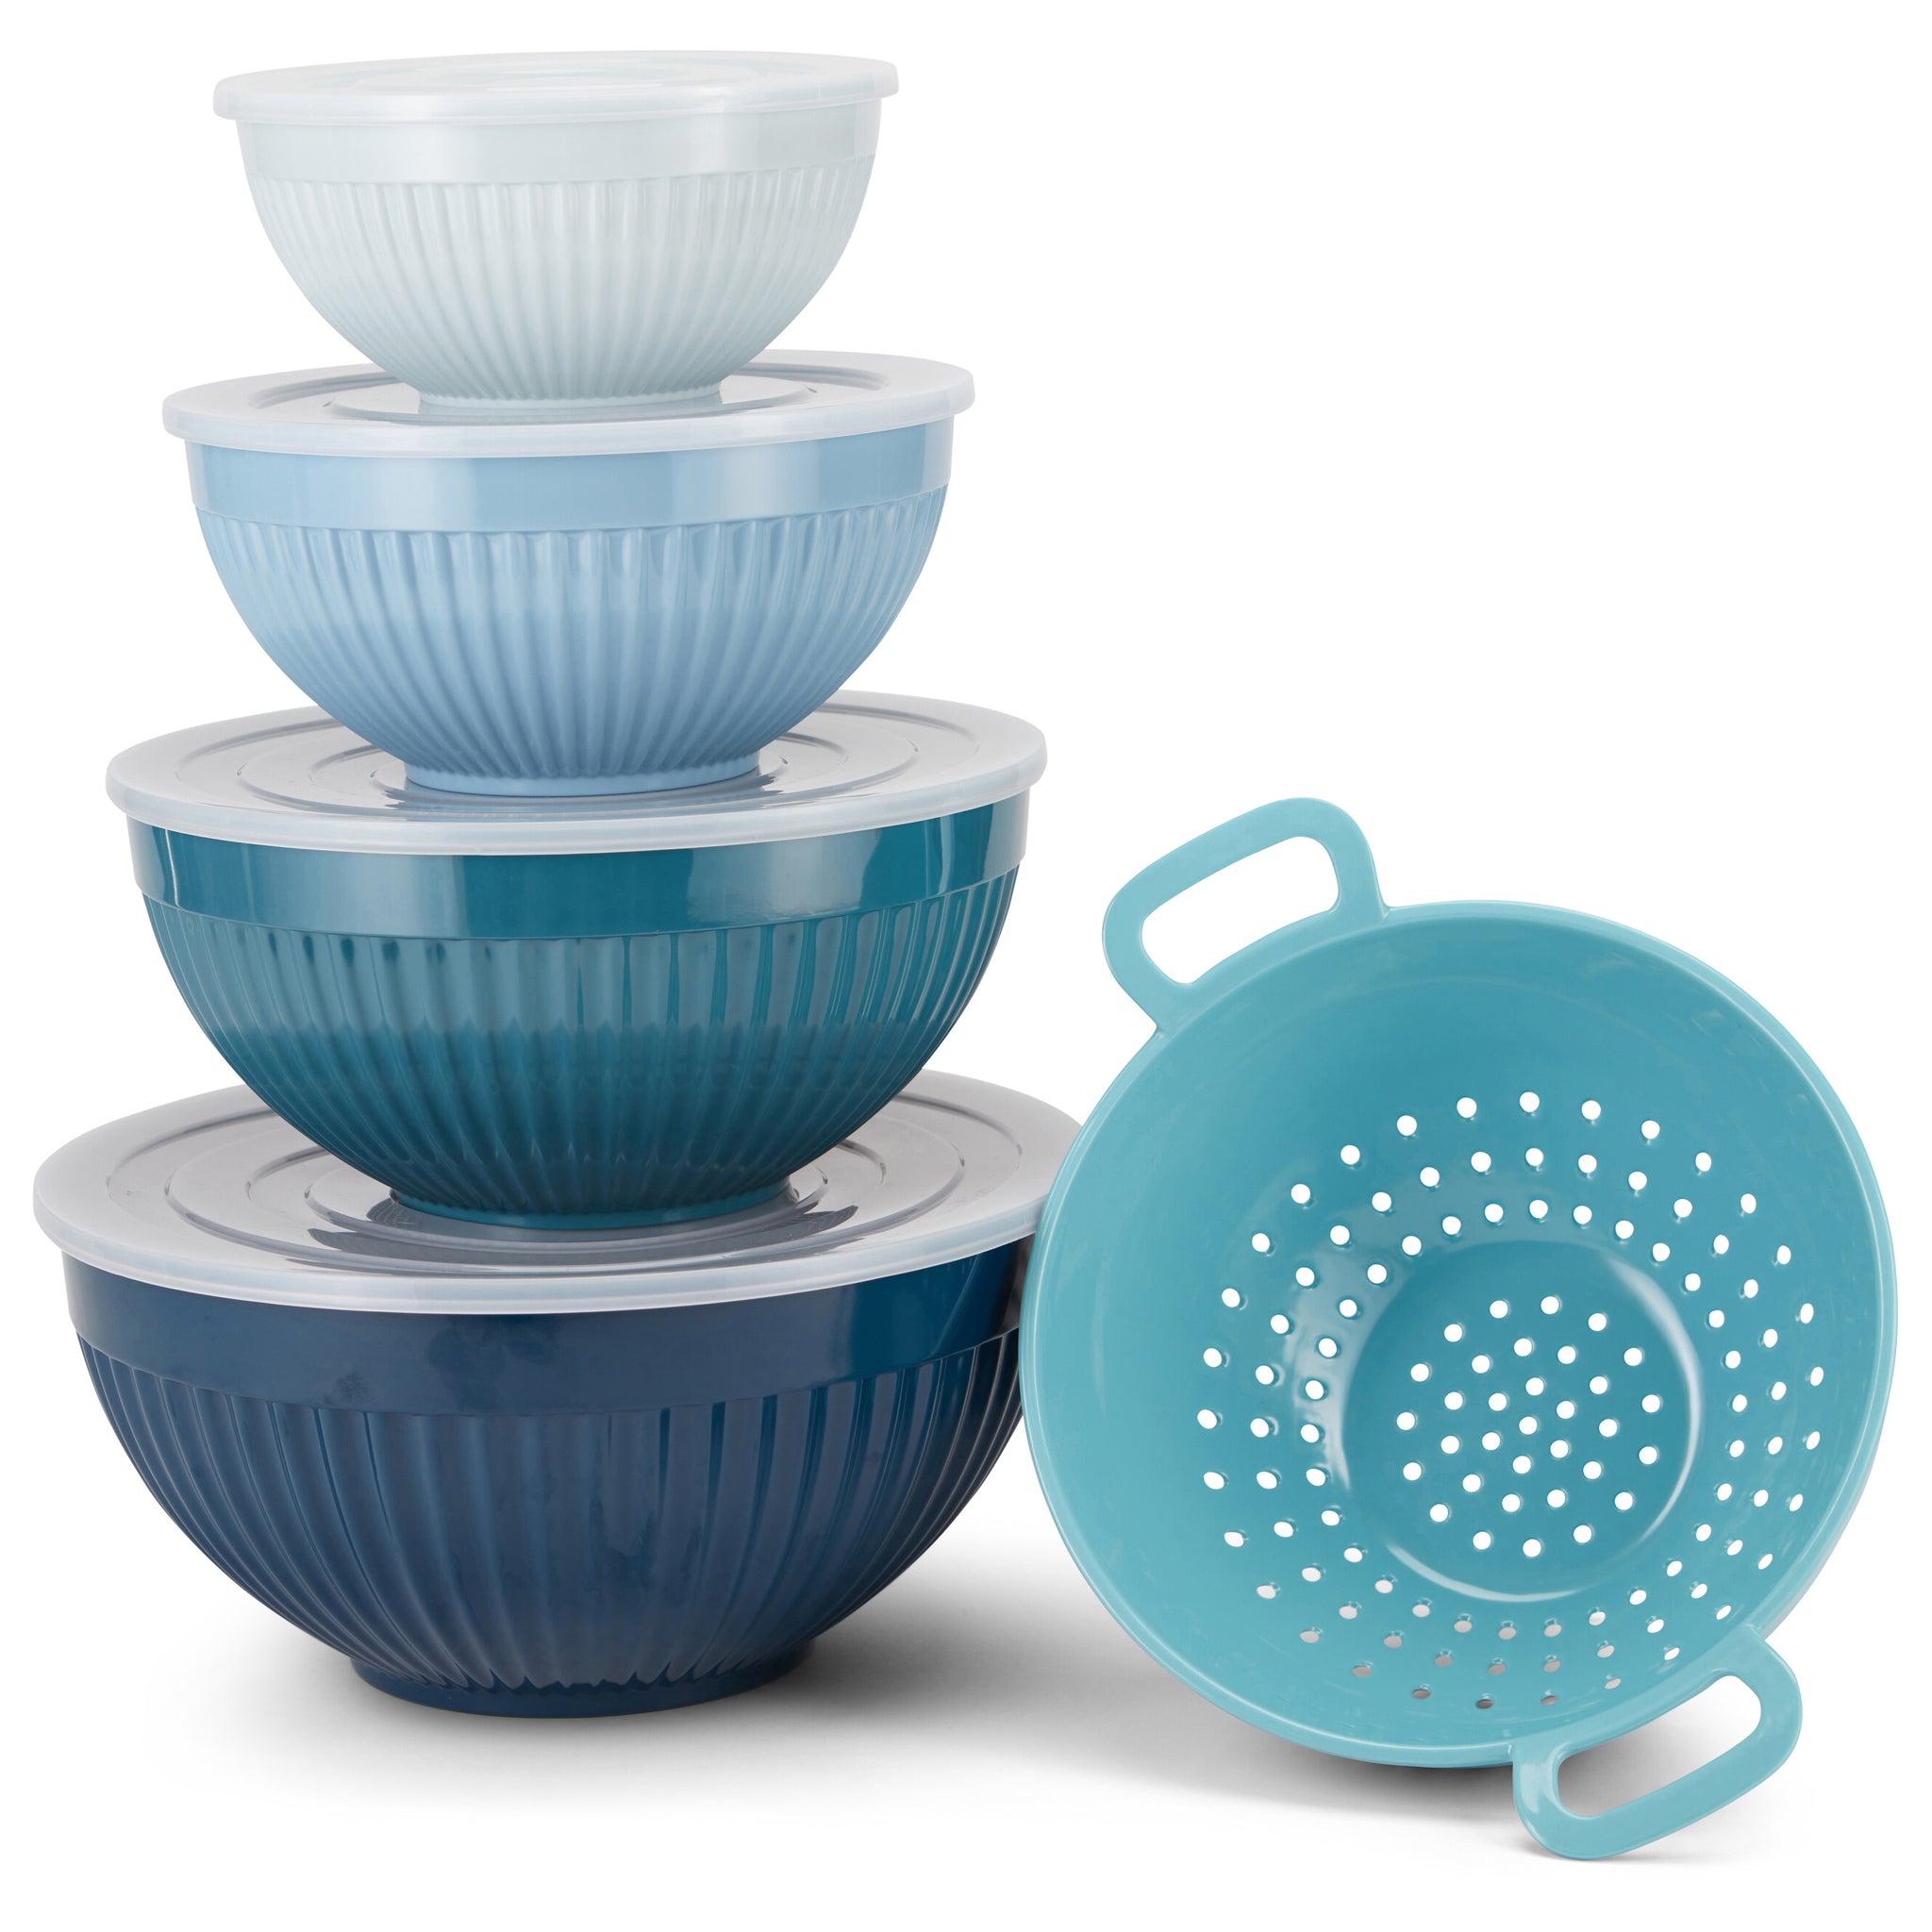 Mixing Bowl Sets with Lids